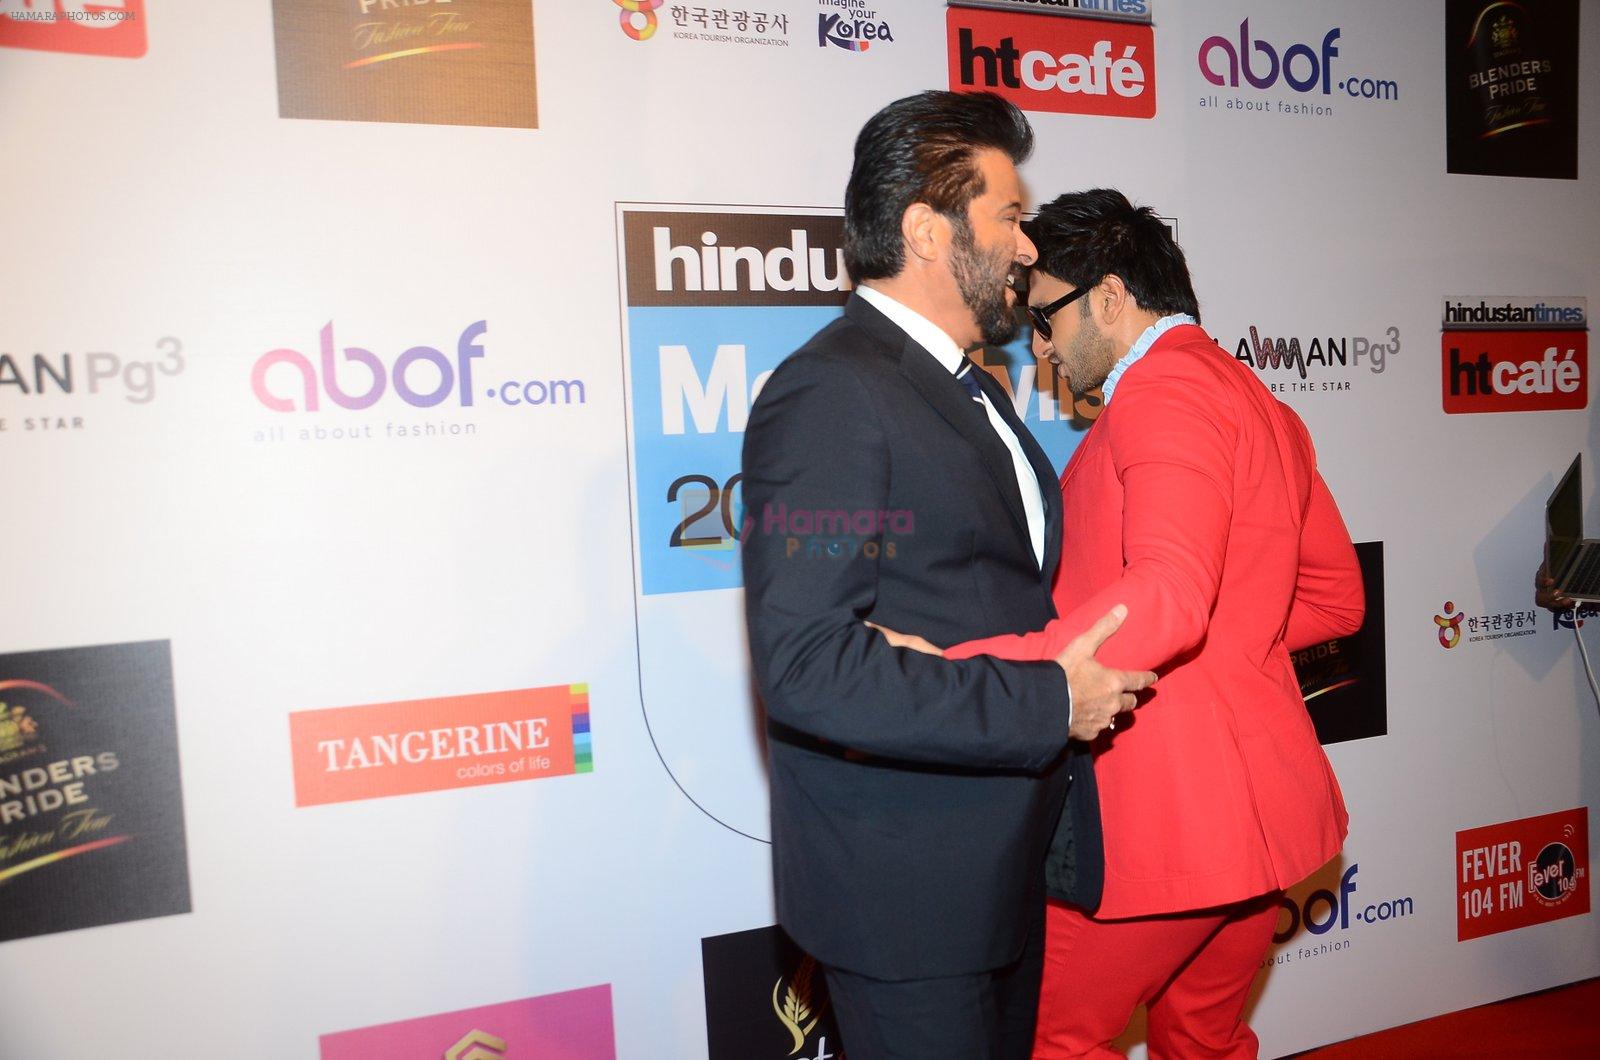 Ranveer Singh, Anil Kapoor at HT Most Stylish on 20th March 2016